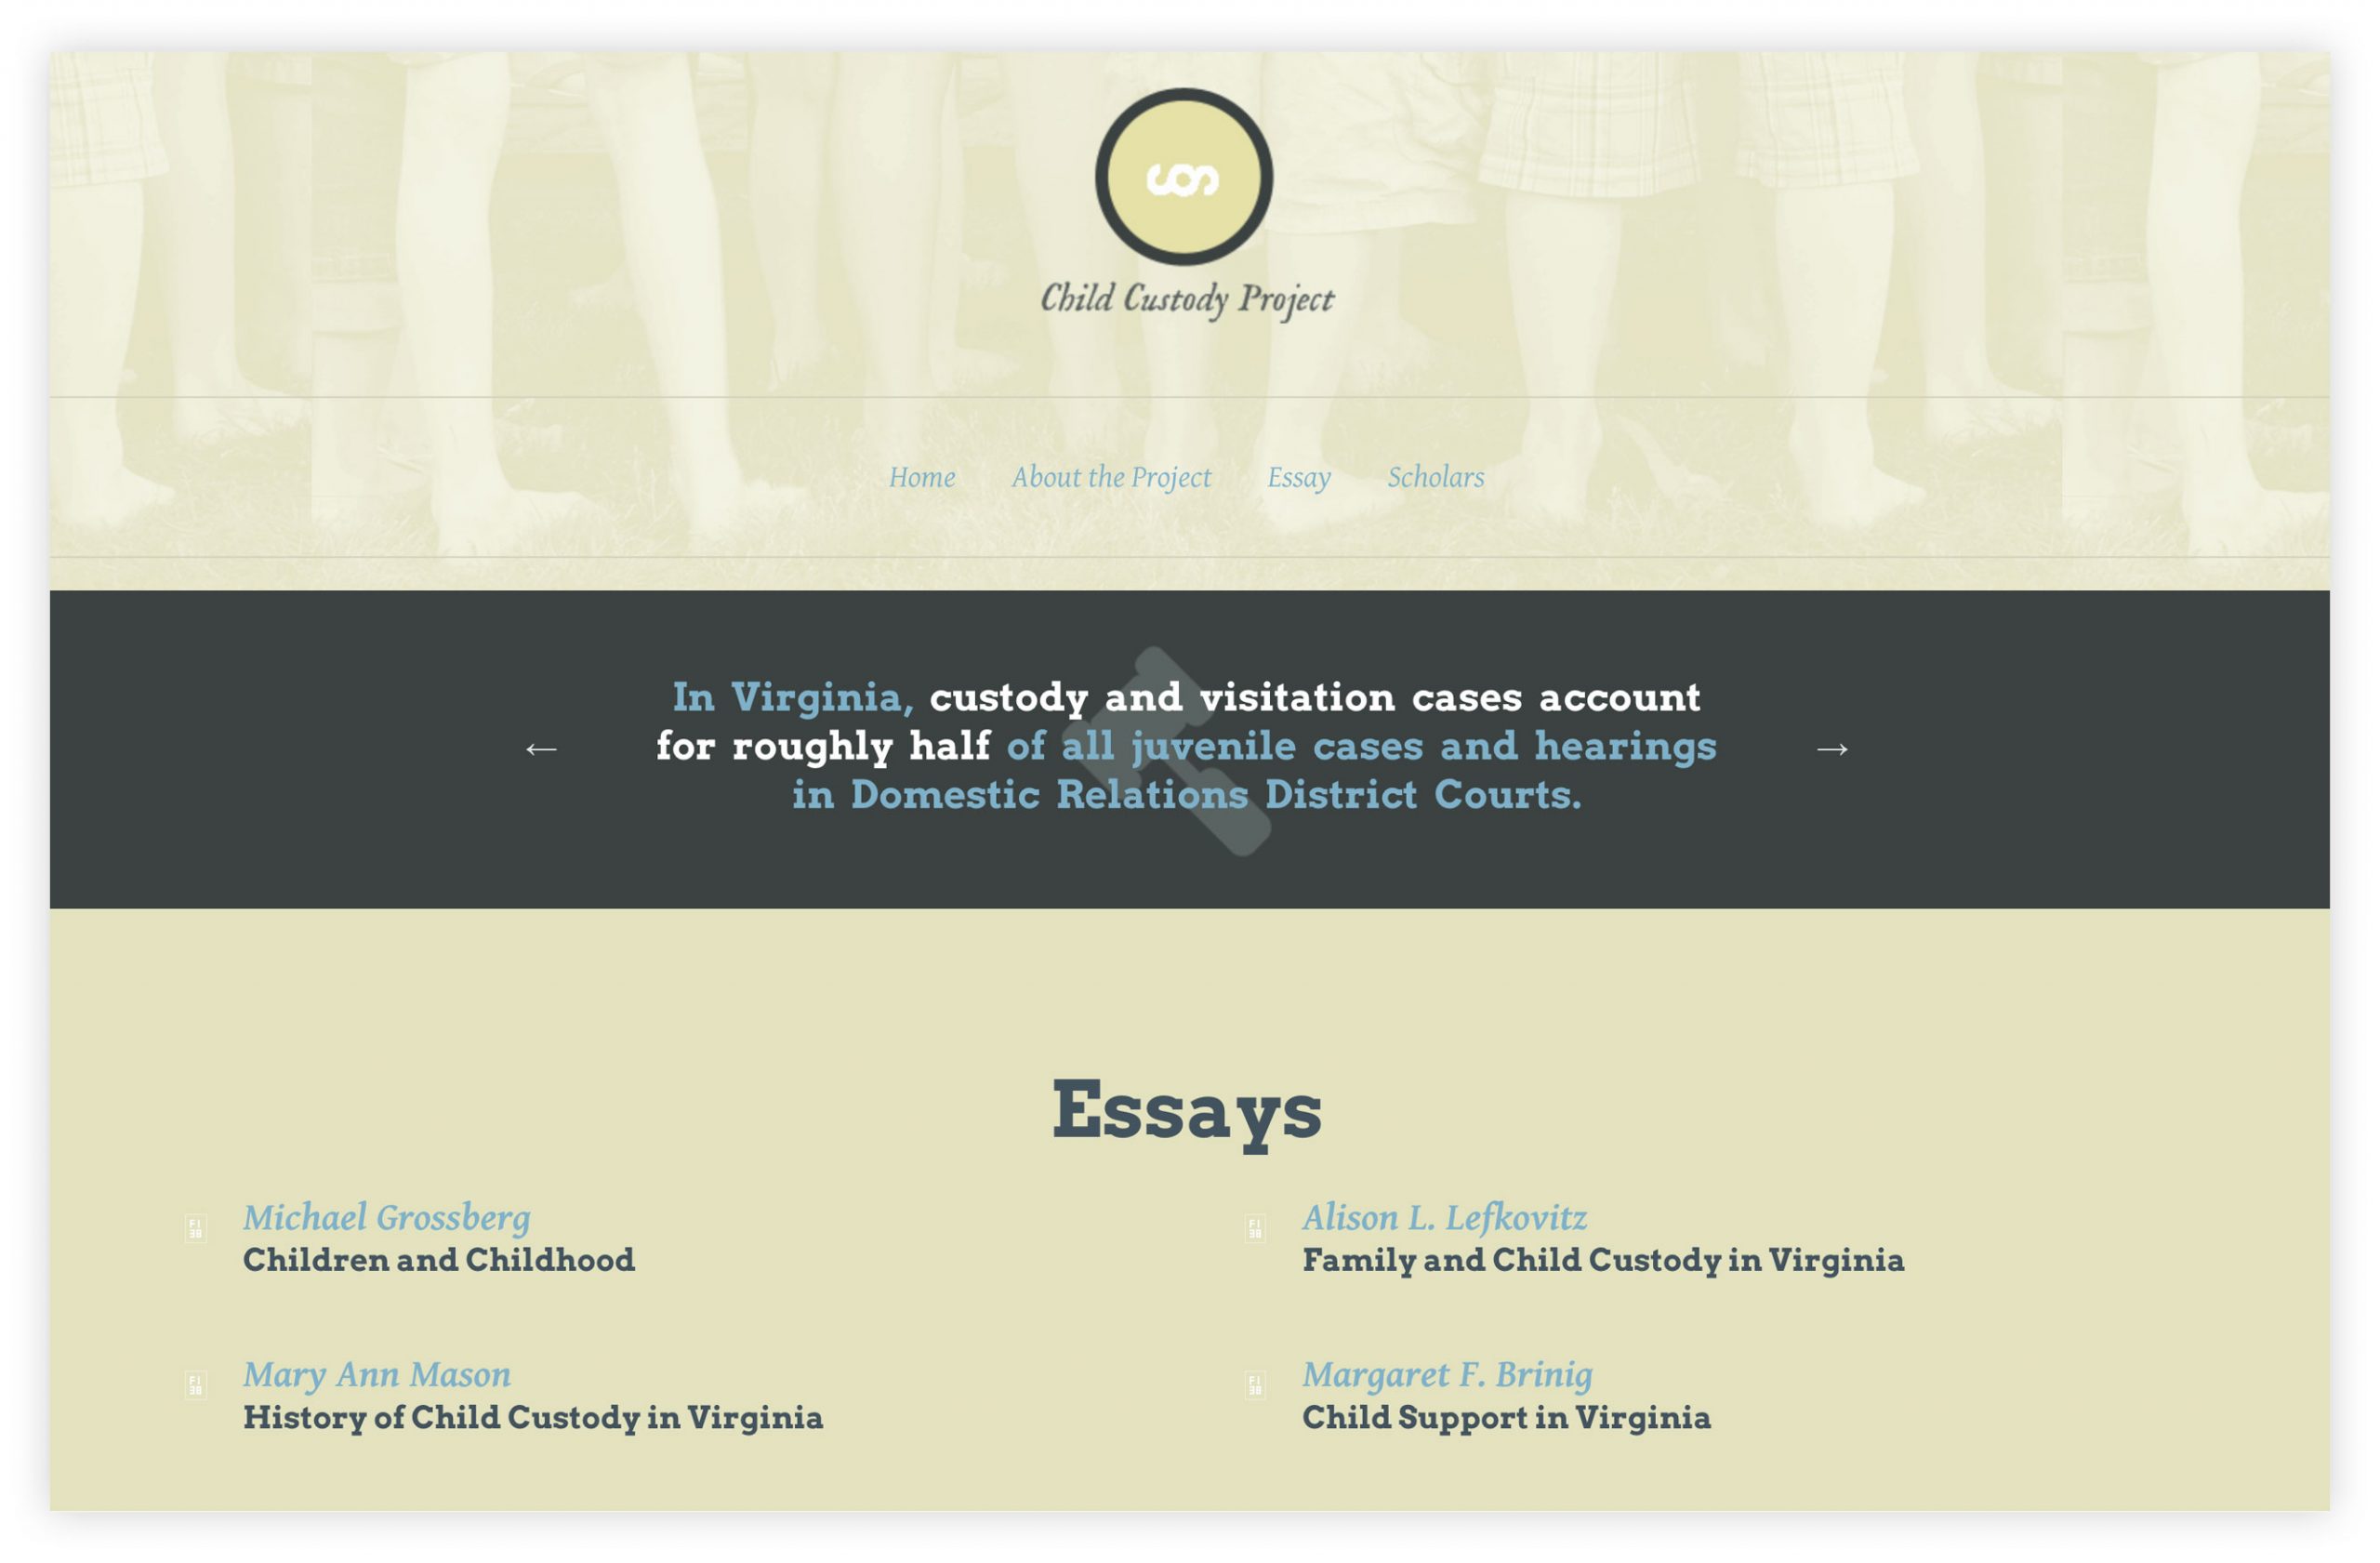 Screengrab of the Child Custody Project website Essays page.